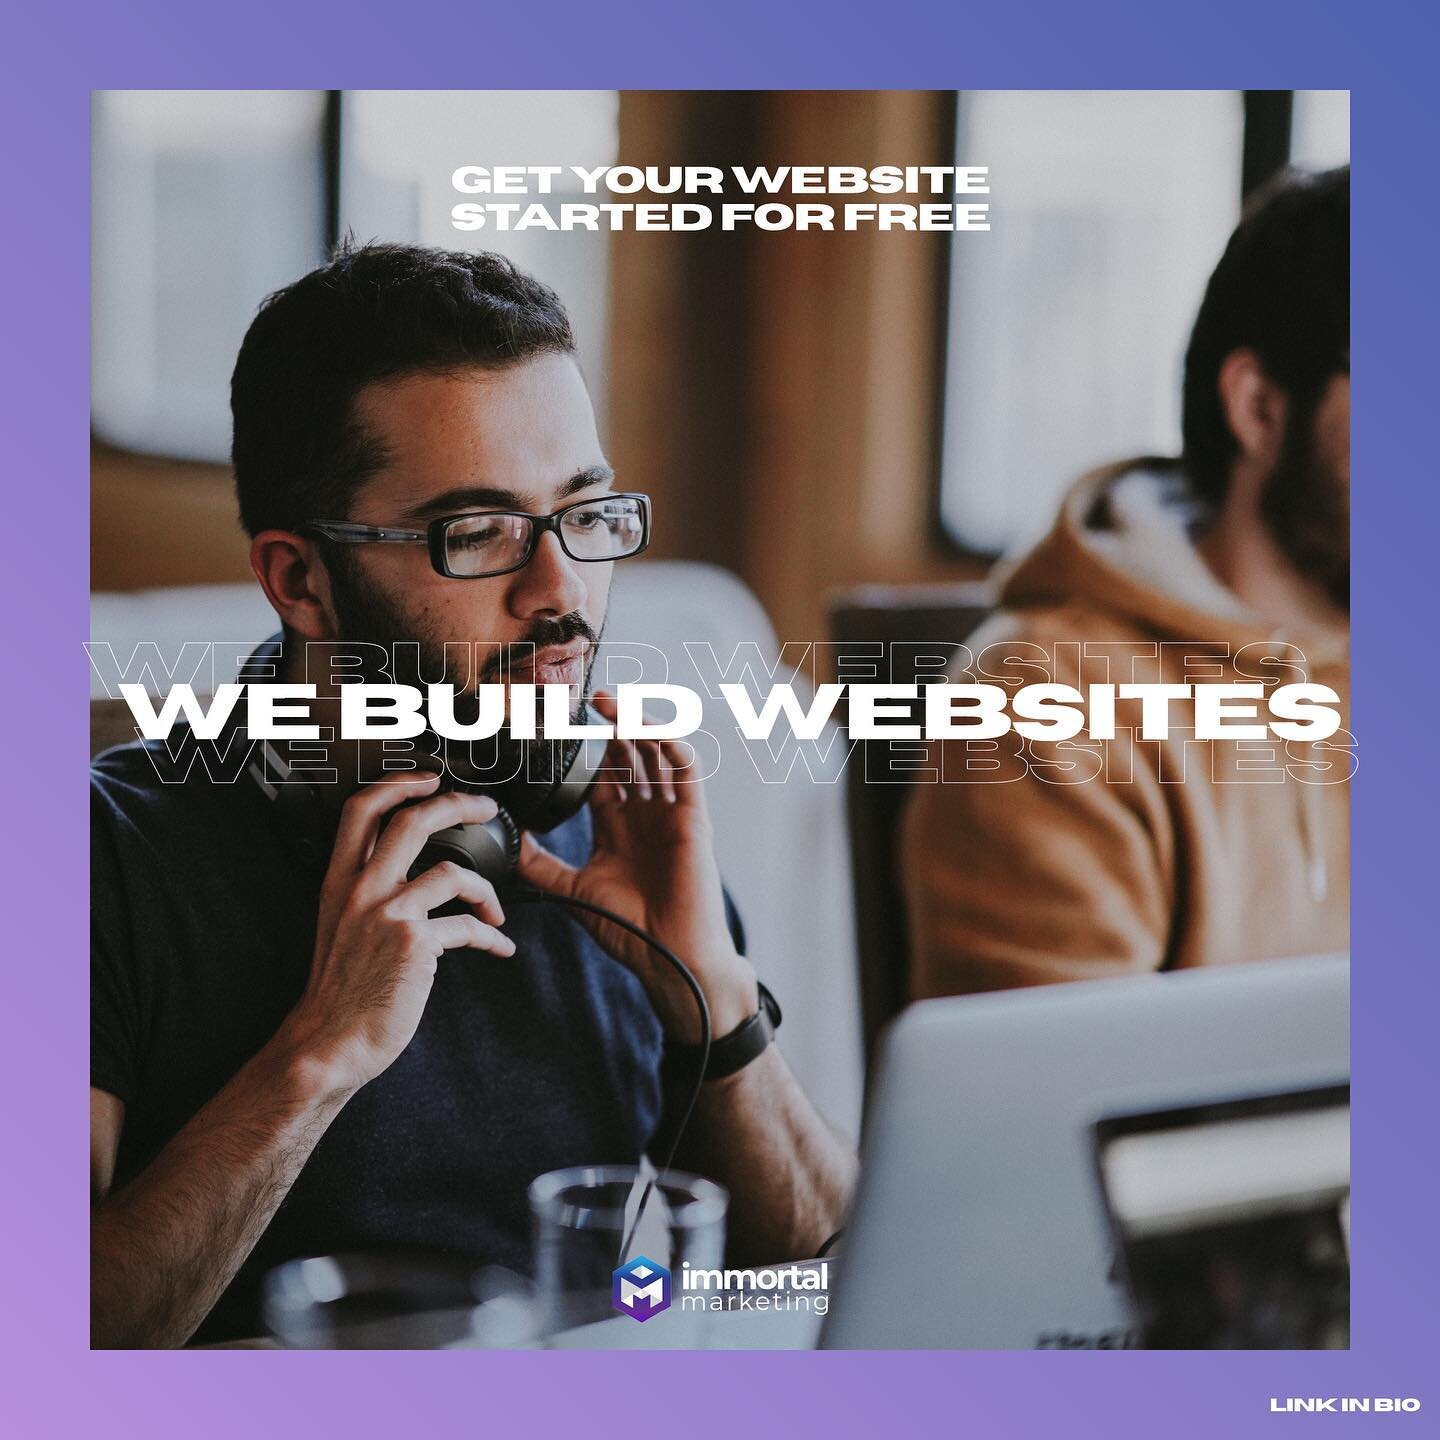 Introduce Your Entire Business To The Rest Of The World 🖥🚀

As a small business ourselves, we love to give back and serve our communities by working directly with other small family businesses and helping them kickstart their website, reaching thei